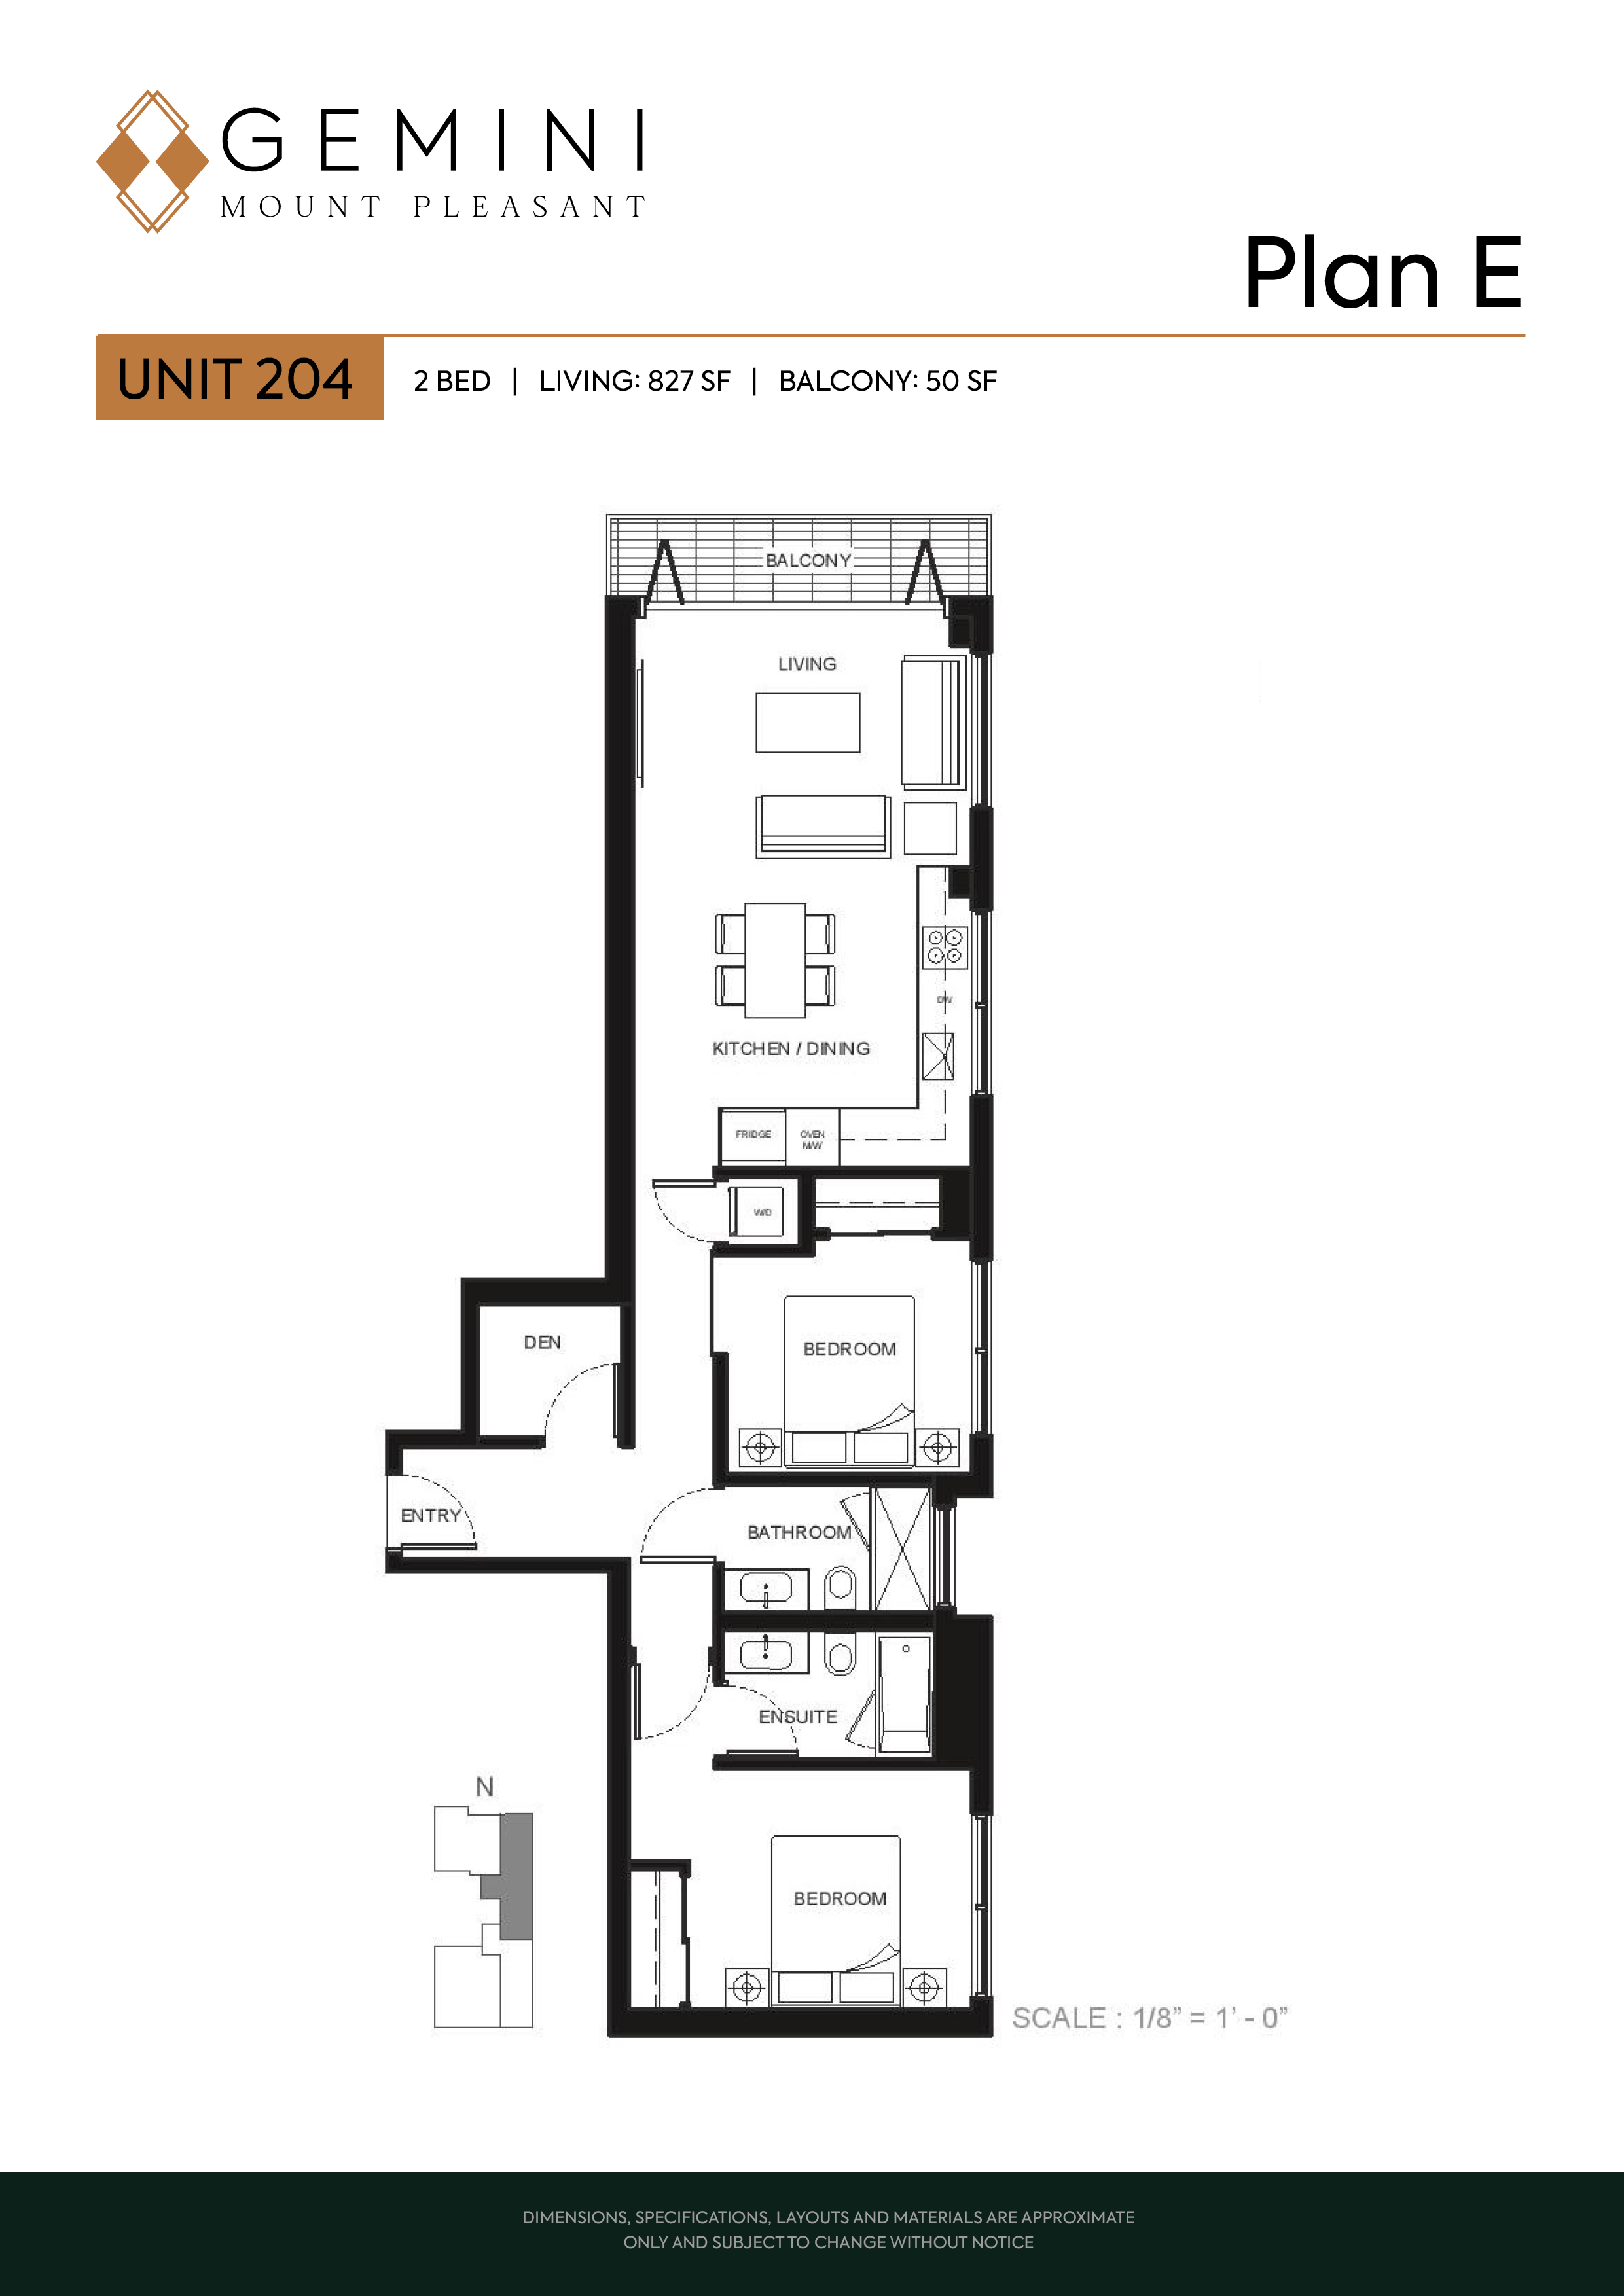 Plan E Floor Plan of Gemini Mount Pleasant Condos with undefined beds